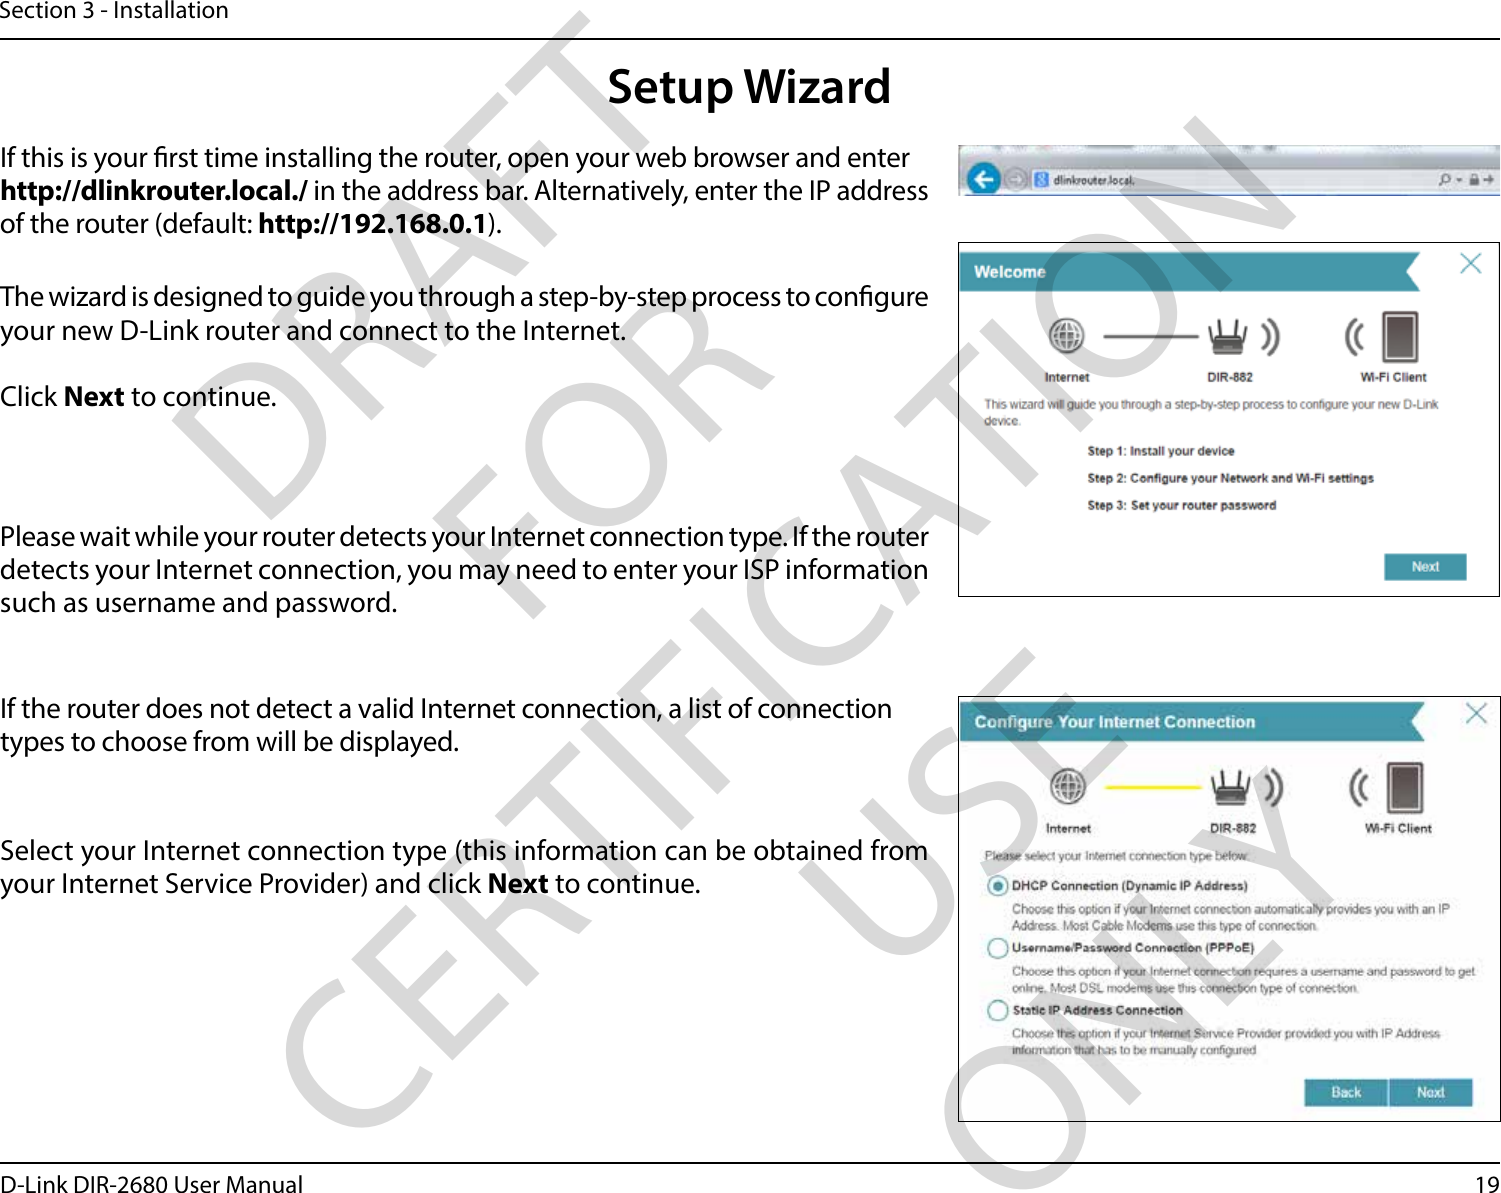 19D-Link DIR-2680 User ManualSection 3 - InstallationThe wizard is designed to guide you through a step-by-step process to congure your new D-Link router and connect to the Internet.Click Next to continue. Setup WizardIf this is your rst time installing the router, open your web browser and enter http://dlinkrouter.local./ in the address bar. Alternatively, enter the IP address of the router (default: http://192.168.0.1). Please wait while your router detects your Internet connection type. If the router detects your Internet connection, you may need to enter your ISP information such as username and password.If the router does not detect a valid Internet connection, a list of connection types to choose from will be displayed.Select your Internet connection type (this information can be obtained from your Internet Service Provider) and click Next to continue.DRAFT FOR CERTIFICATION USE ONLY